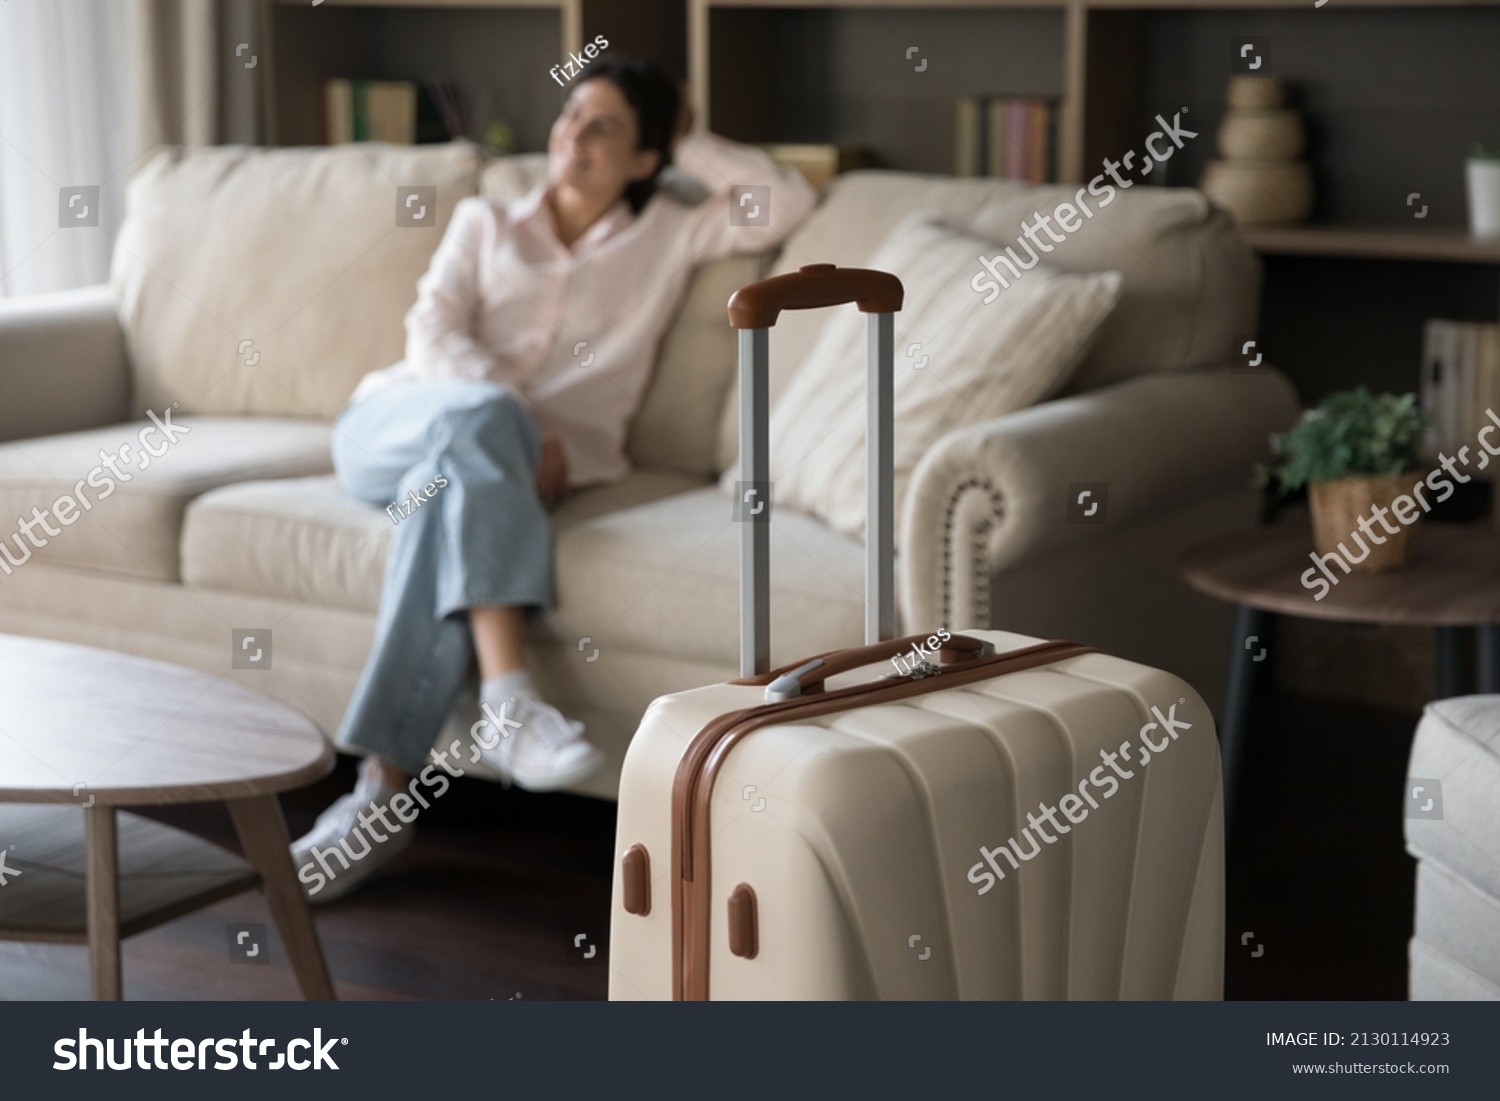 Focus on beige suitcase with blurred carefree young woman sitting on sofa on background. Joyful refreshed millennial Hispanic lady satisfied with vacation travel, relaxing alone in modern hotel room. #2130114923